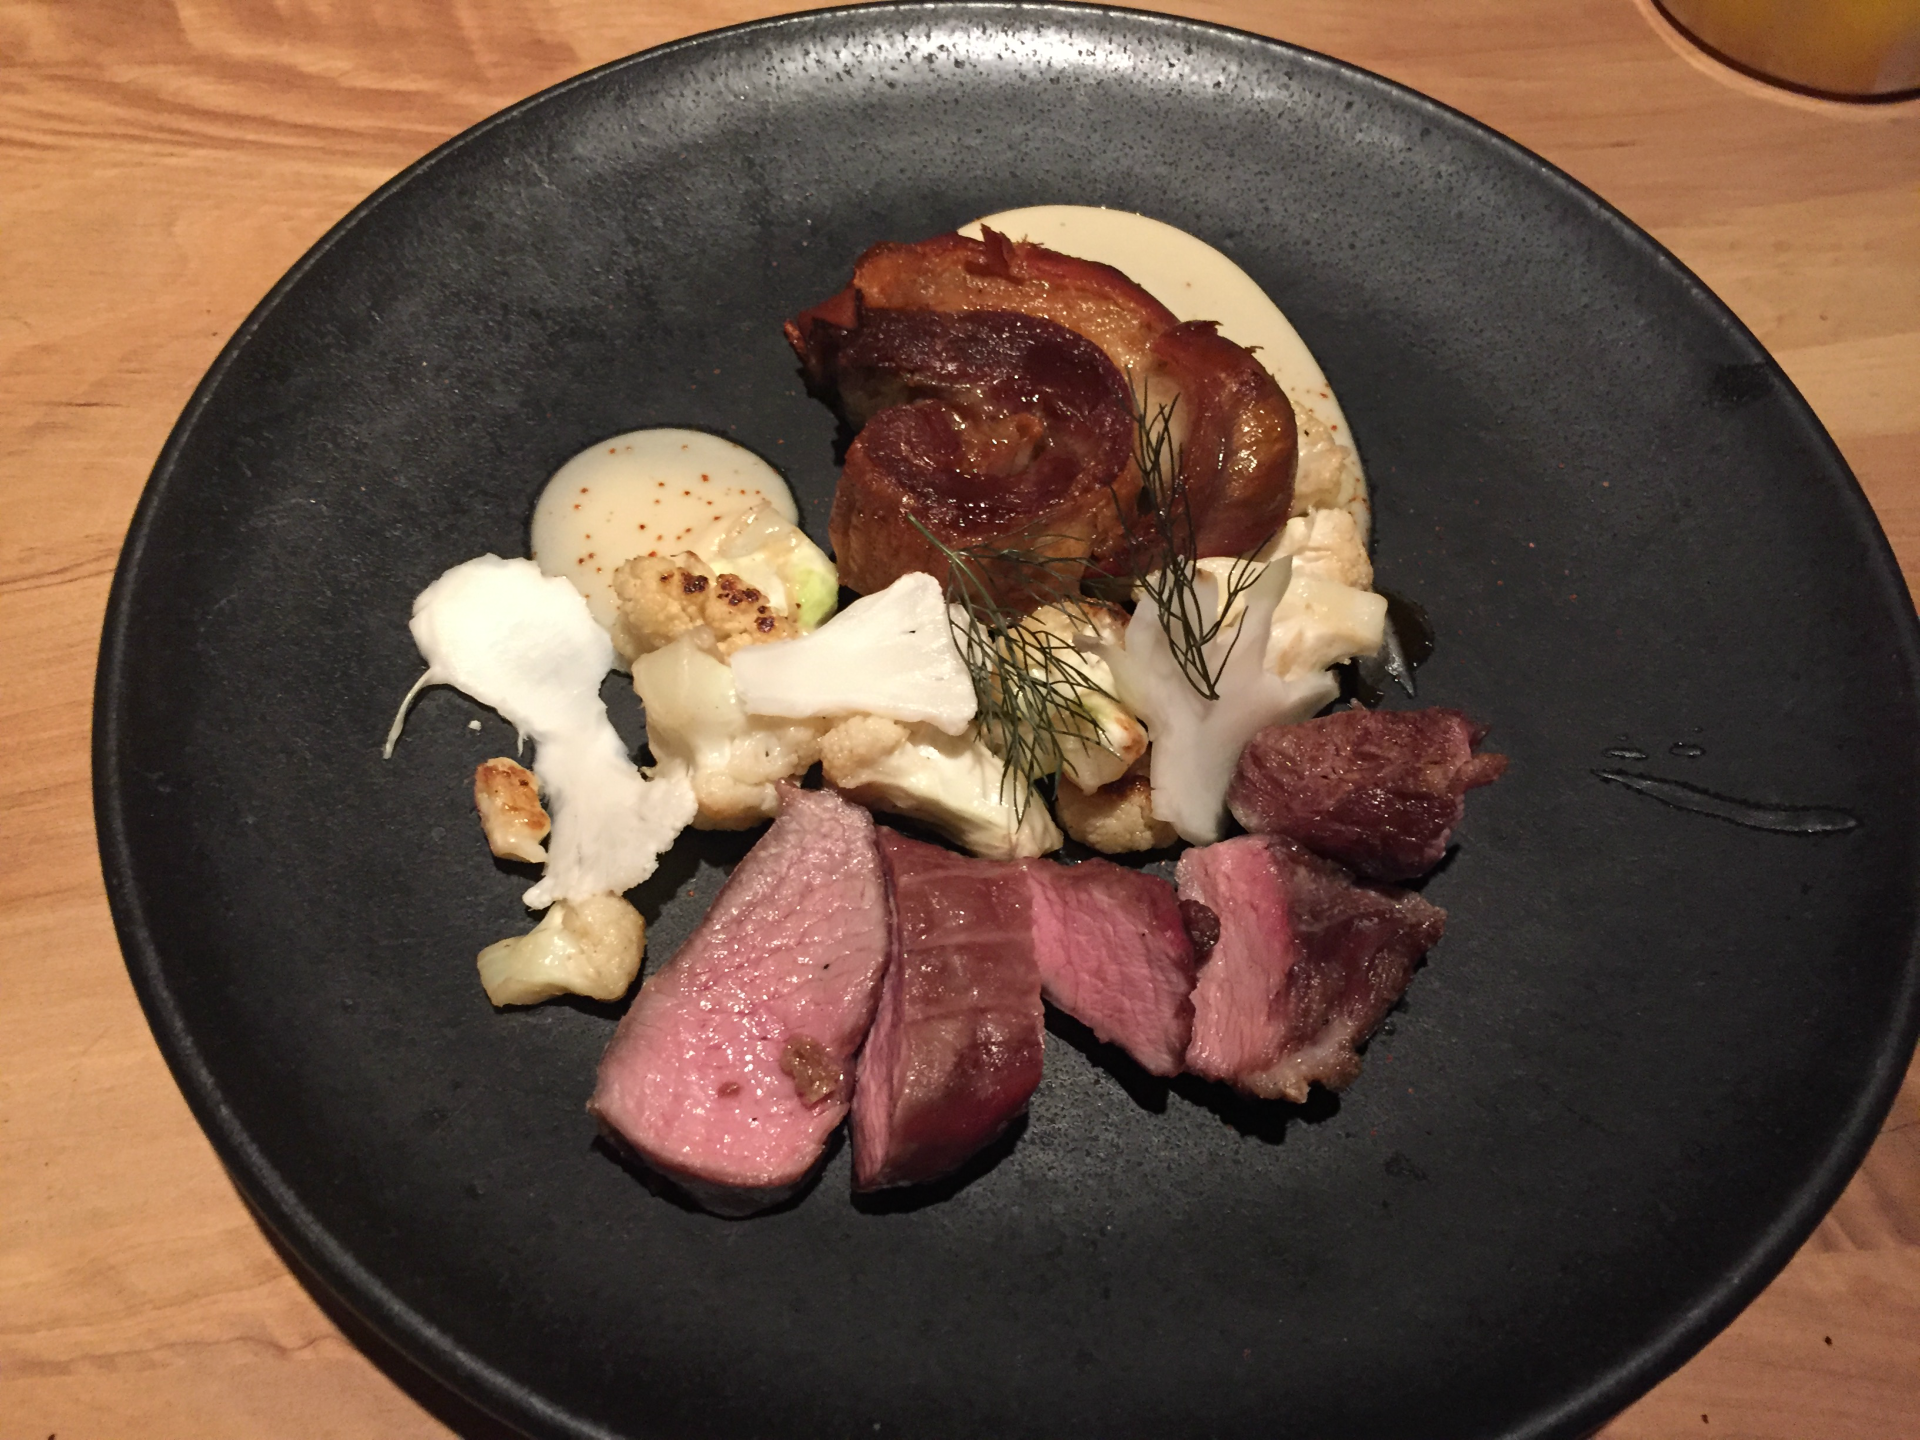 The lamb and cauliflower entree included a surcharge to "reflect the true cost of beef and lamb."